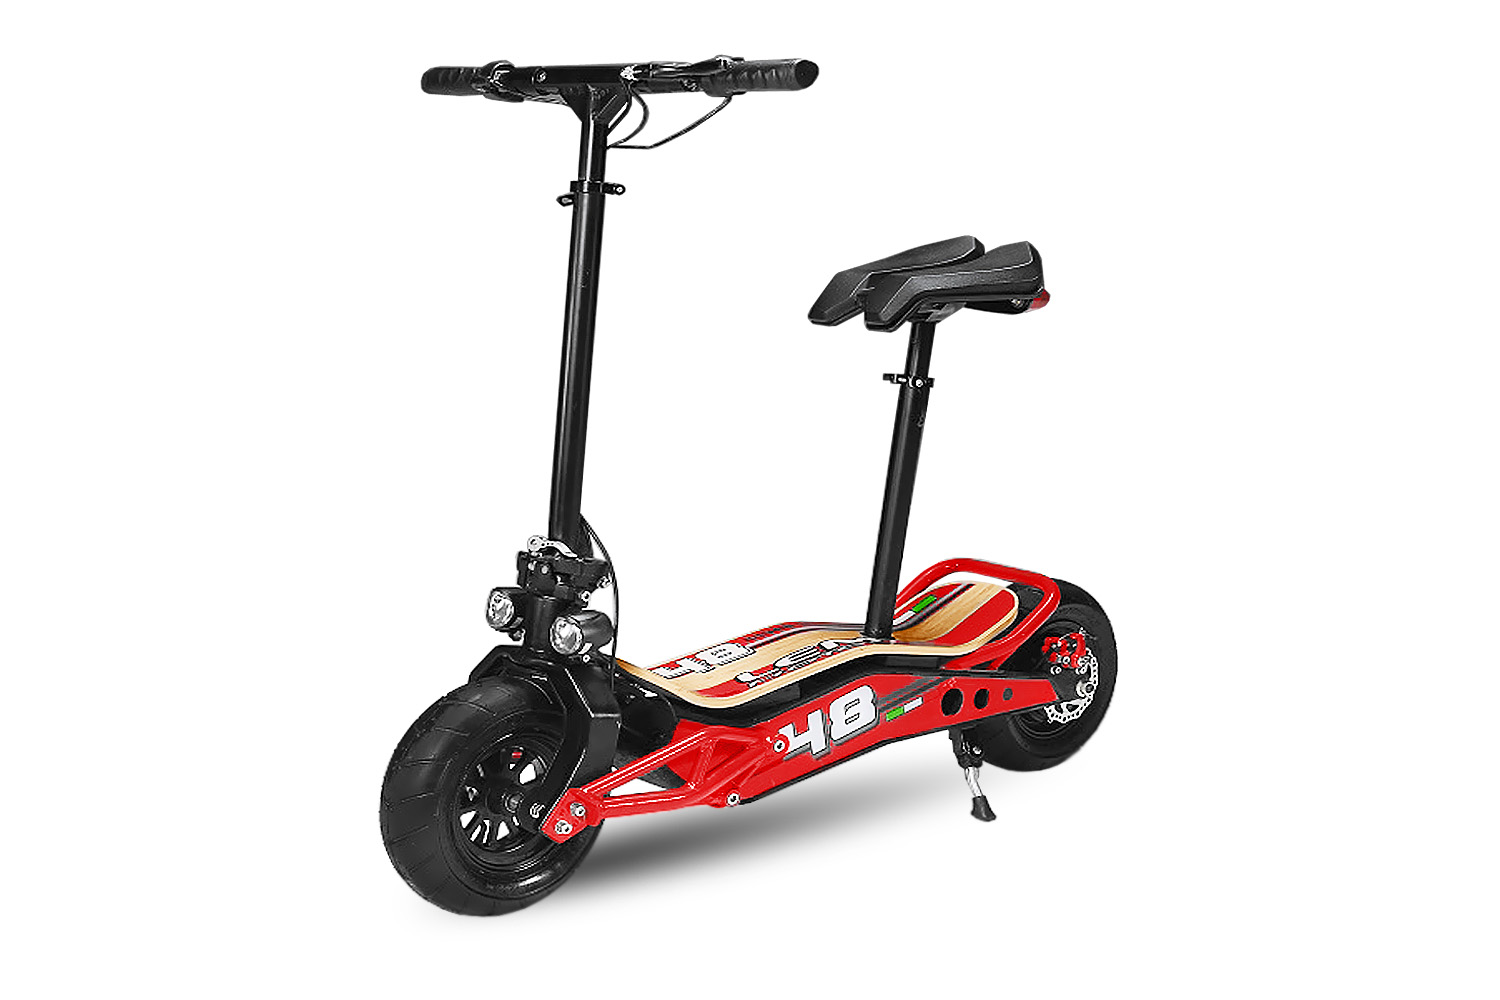 PATINETE ELECTRICO CON ASIENTO 1600W BRUSHLESS 48V/12Ah (CONSULTAR  DISPONIBILIDAD) 